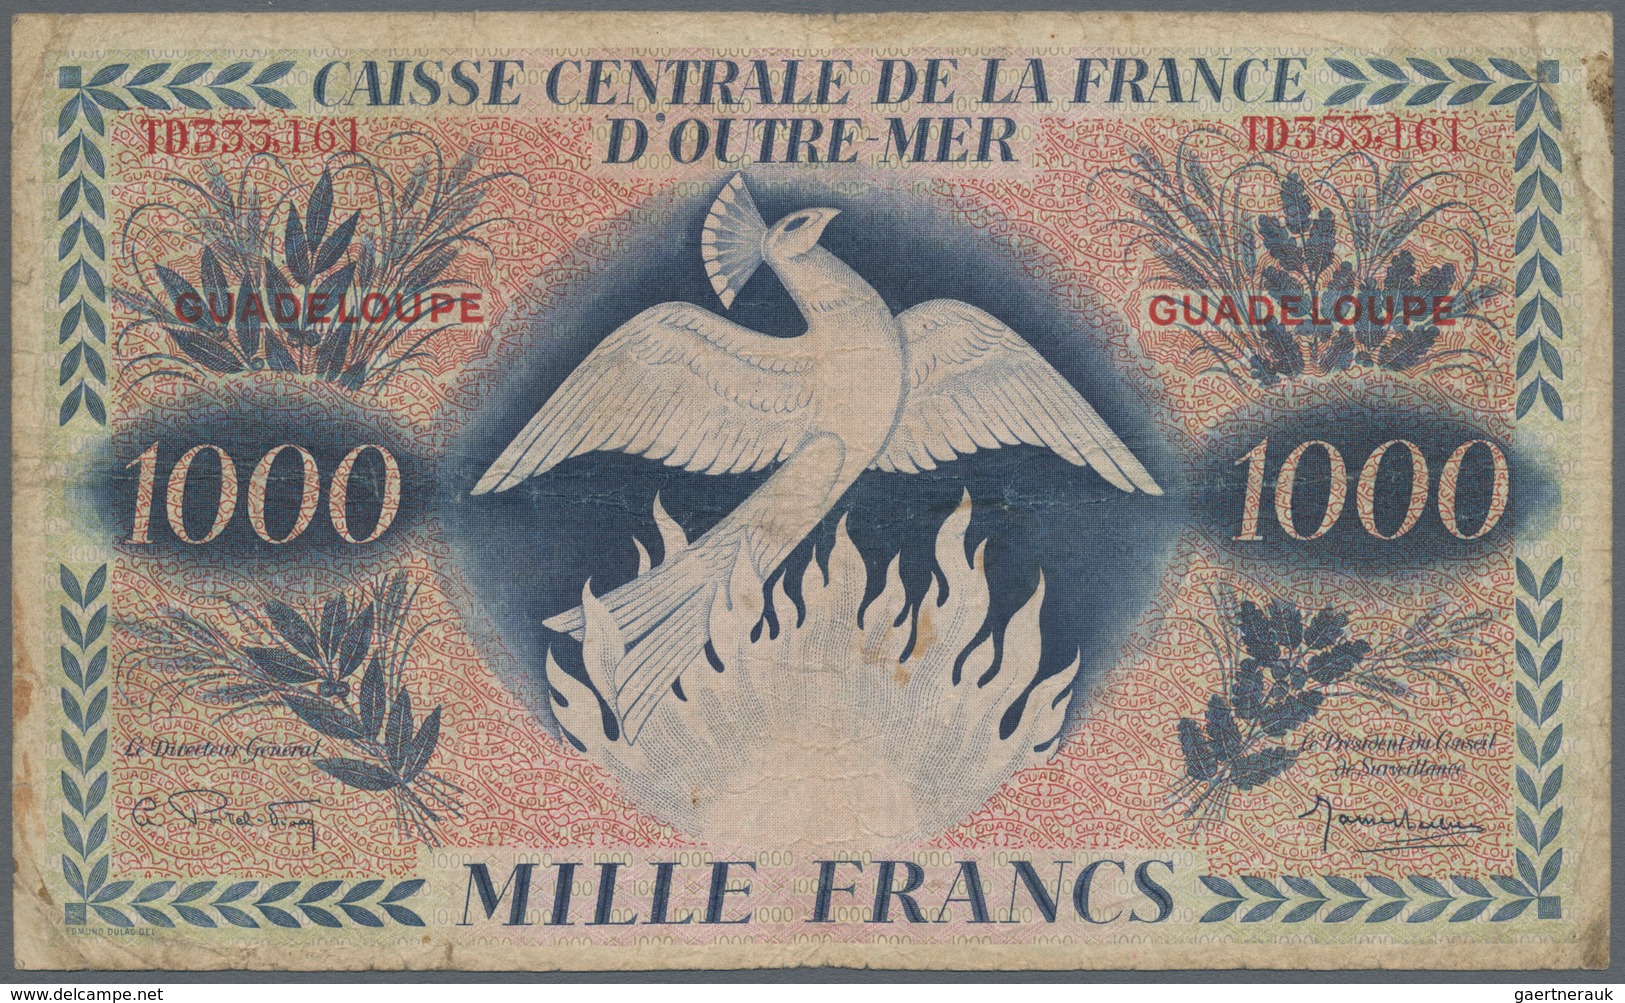 Guadeloupe: Caisse Centrale De La France D'Outre-Mer 1000 Francs 1944 With Watermark, P.30b, Extraor - Other - America